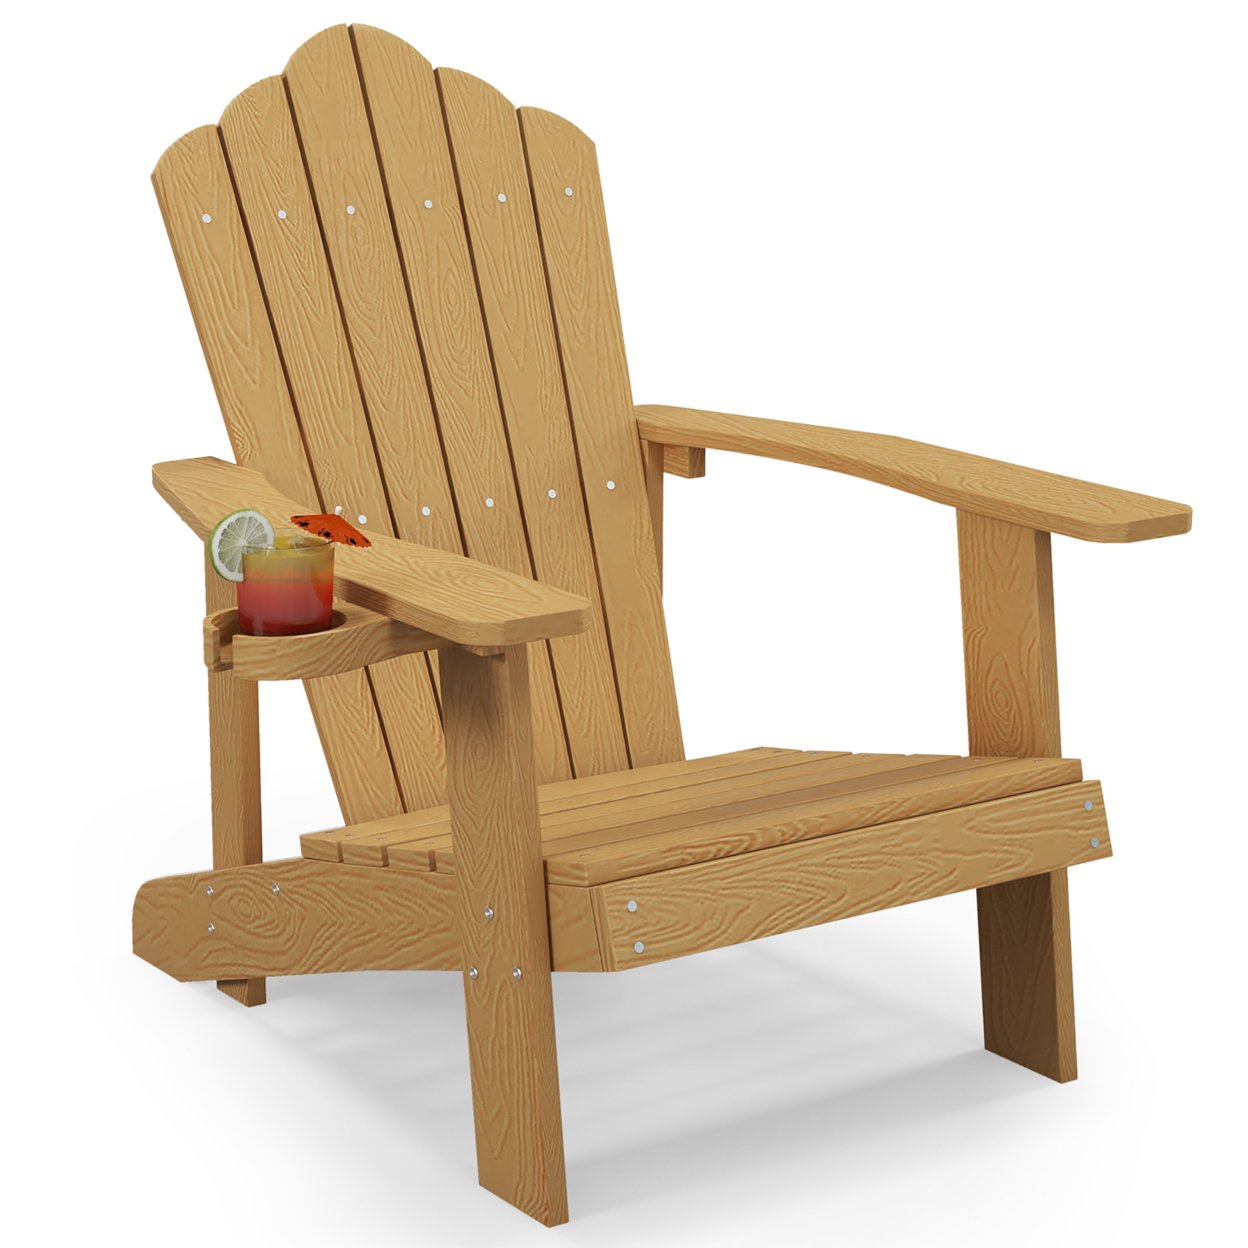 Patio HIPS Outdoor Weather Resistant Slatted Chair Adirondack Chair W/ Cup Holder - Teak